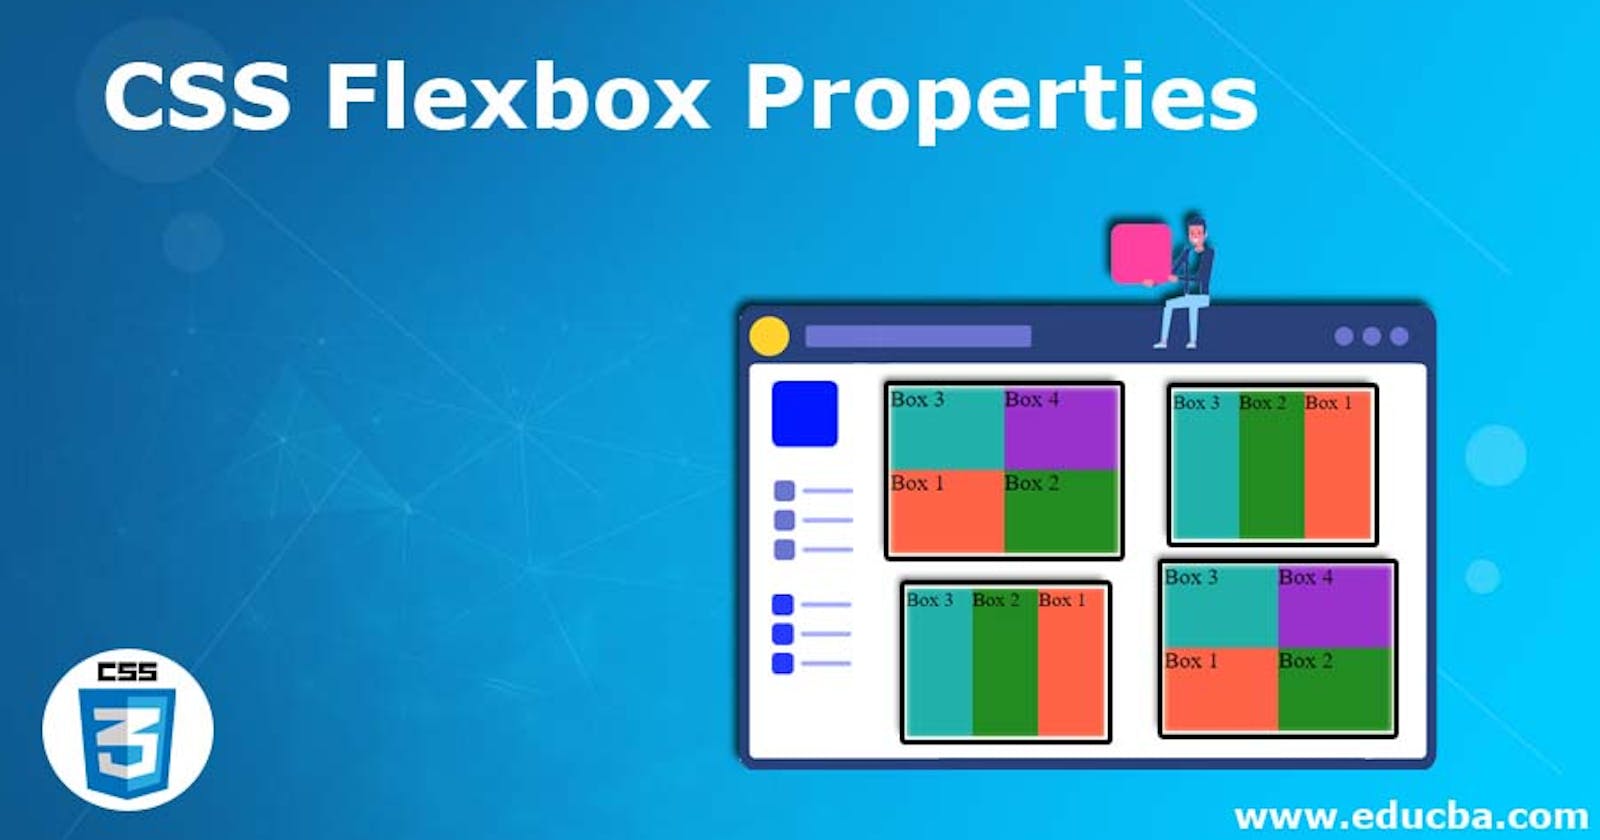 Flexbox and its Properties